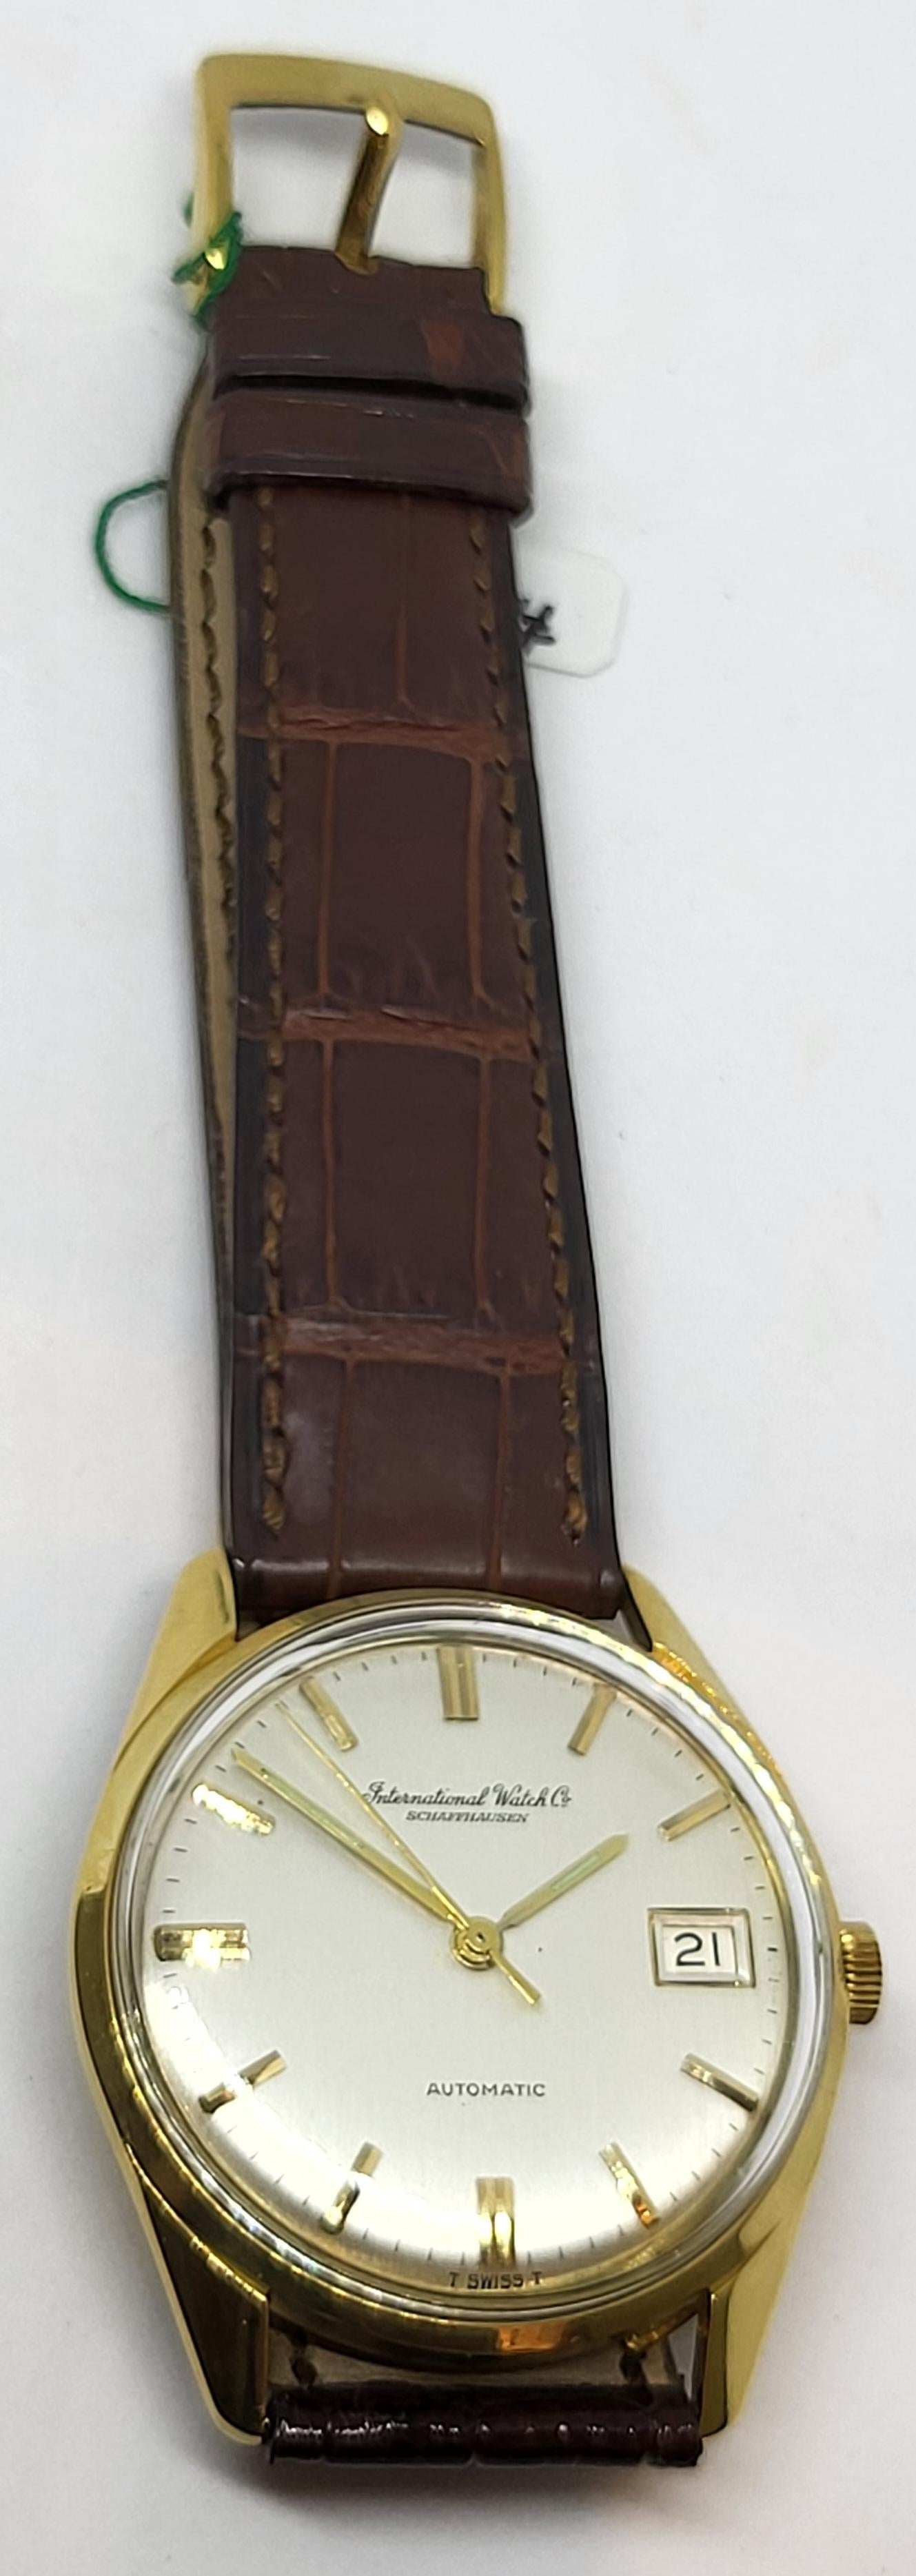 18 Kt Gold IWC Wrist Watch Automatic Caliber 8541 / 810A For Sale 2